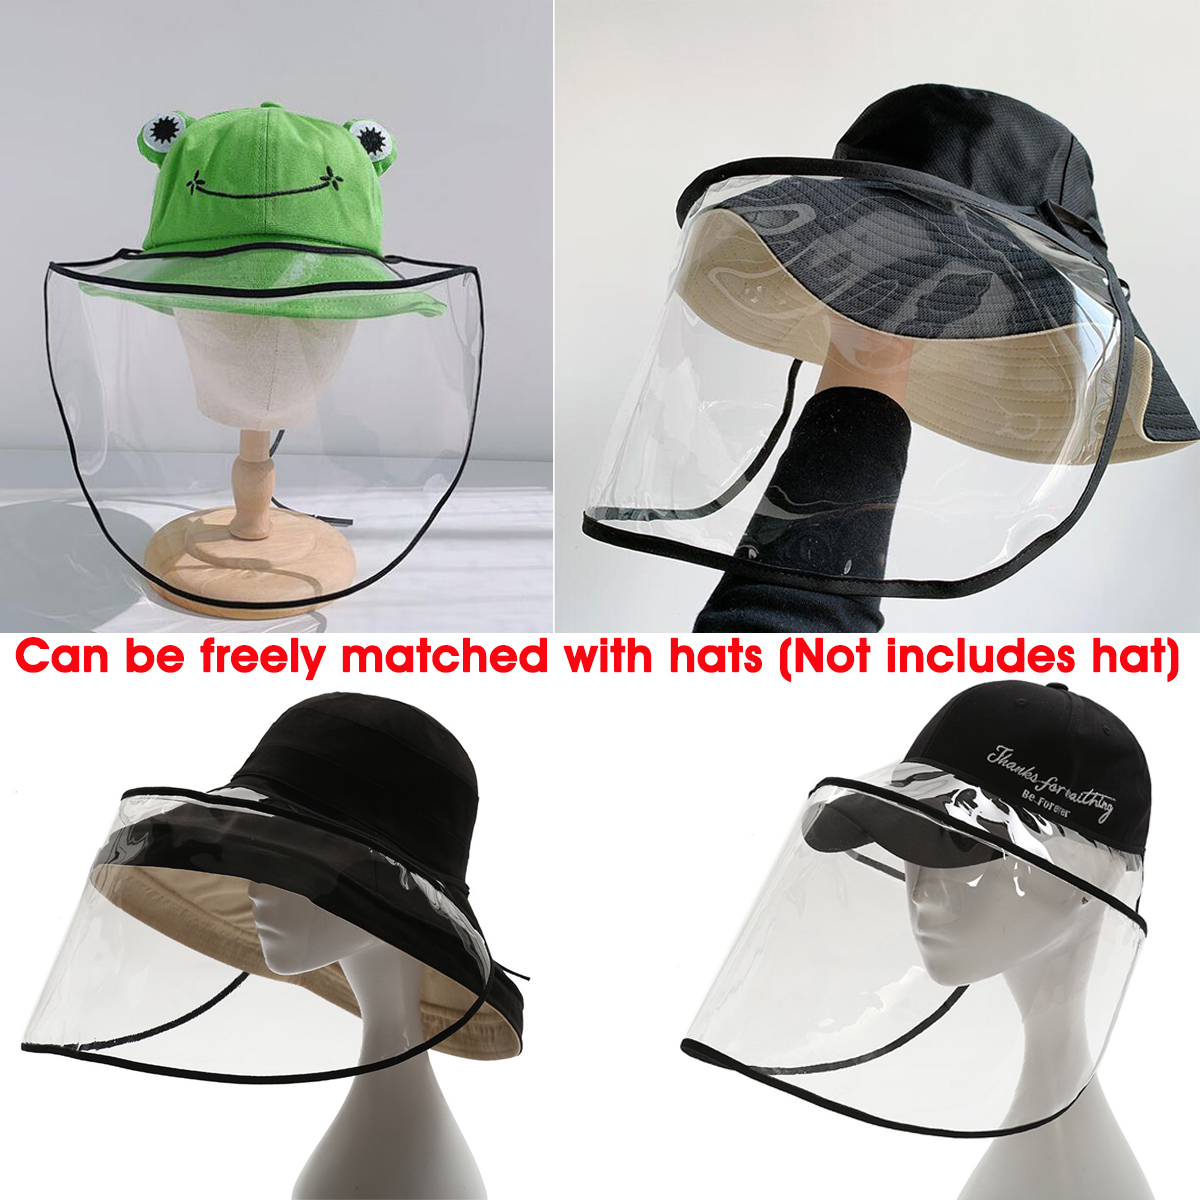 PVC-Transparent-Breathable-Splash-proof-Dustproof-Full-Face-Mask-Disassembleable-For-All-Hats-Fishma-1660688-2